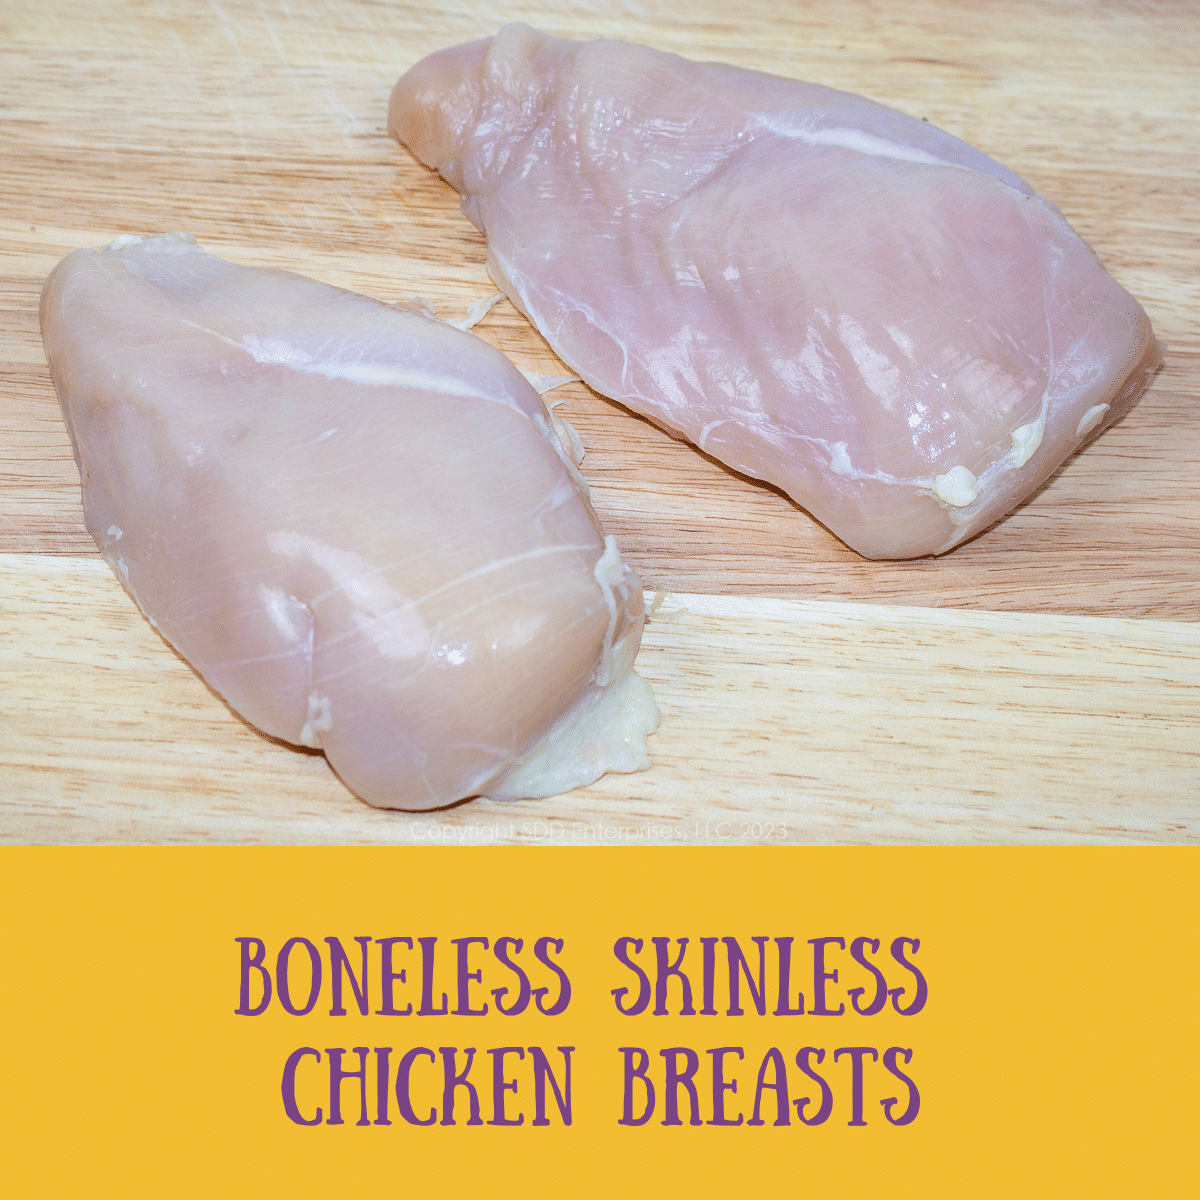 two boneless skinless chicken breasts on a cutting board.